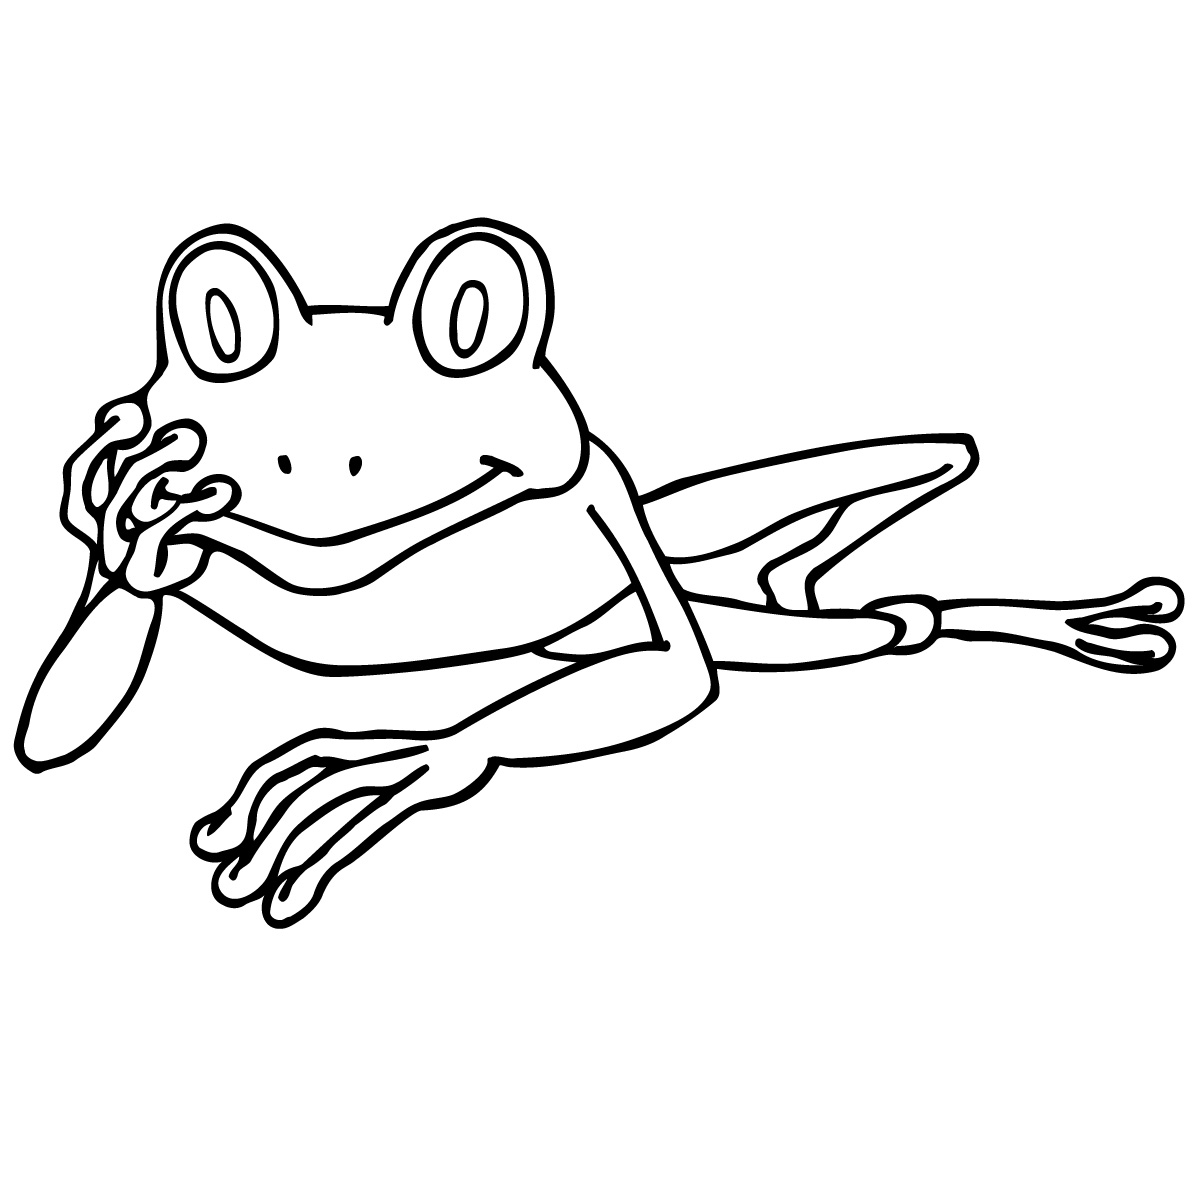 Tree Frog Clip Art - Clipart library